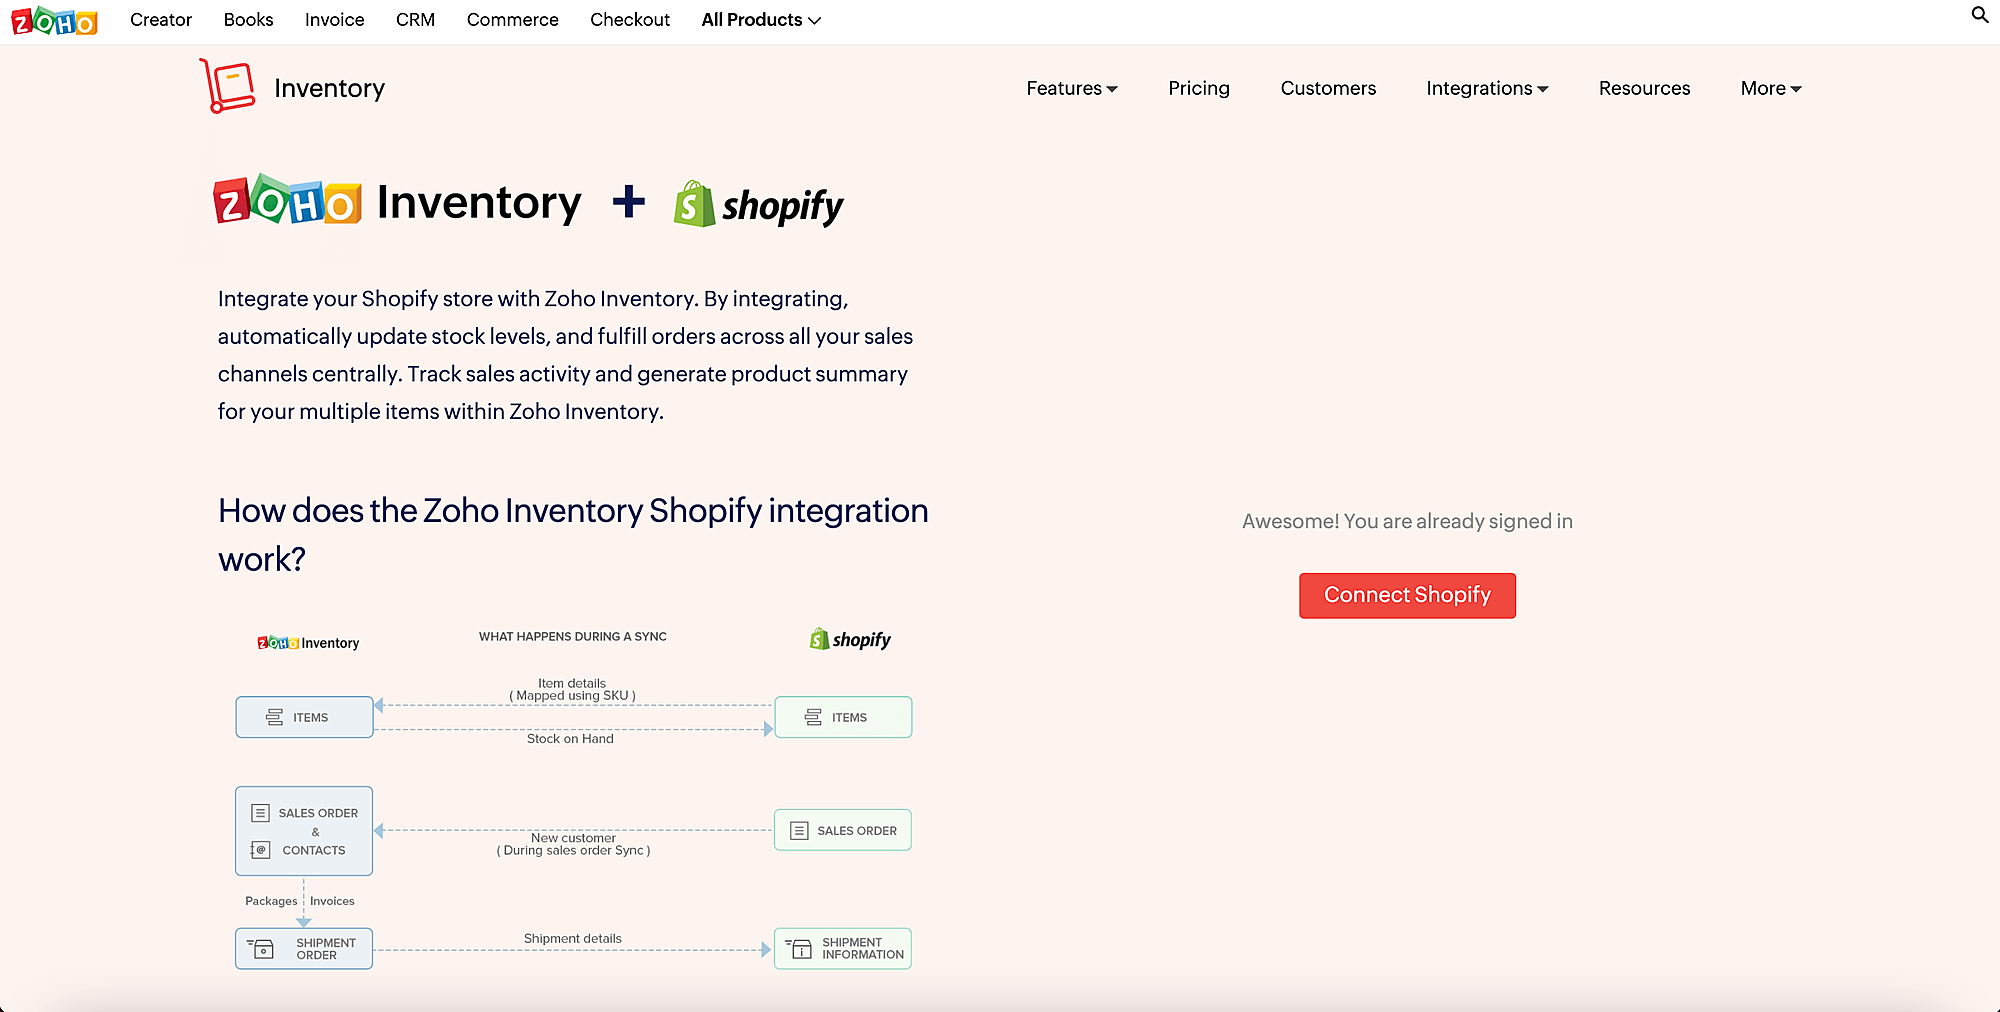 Connect Shopify landing page